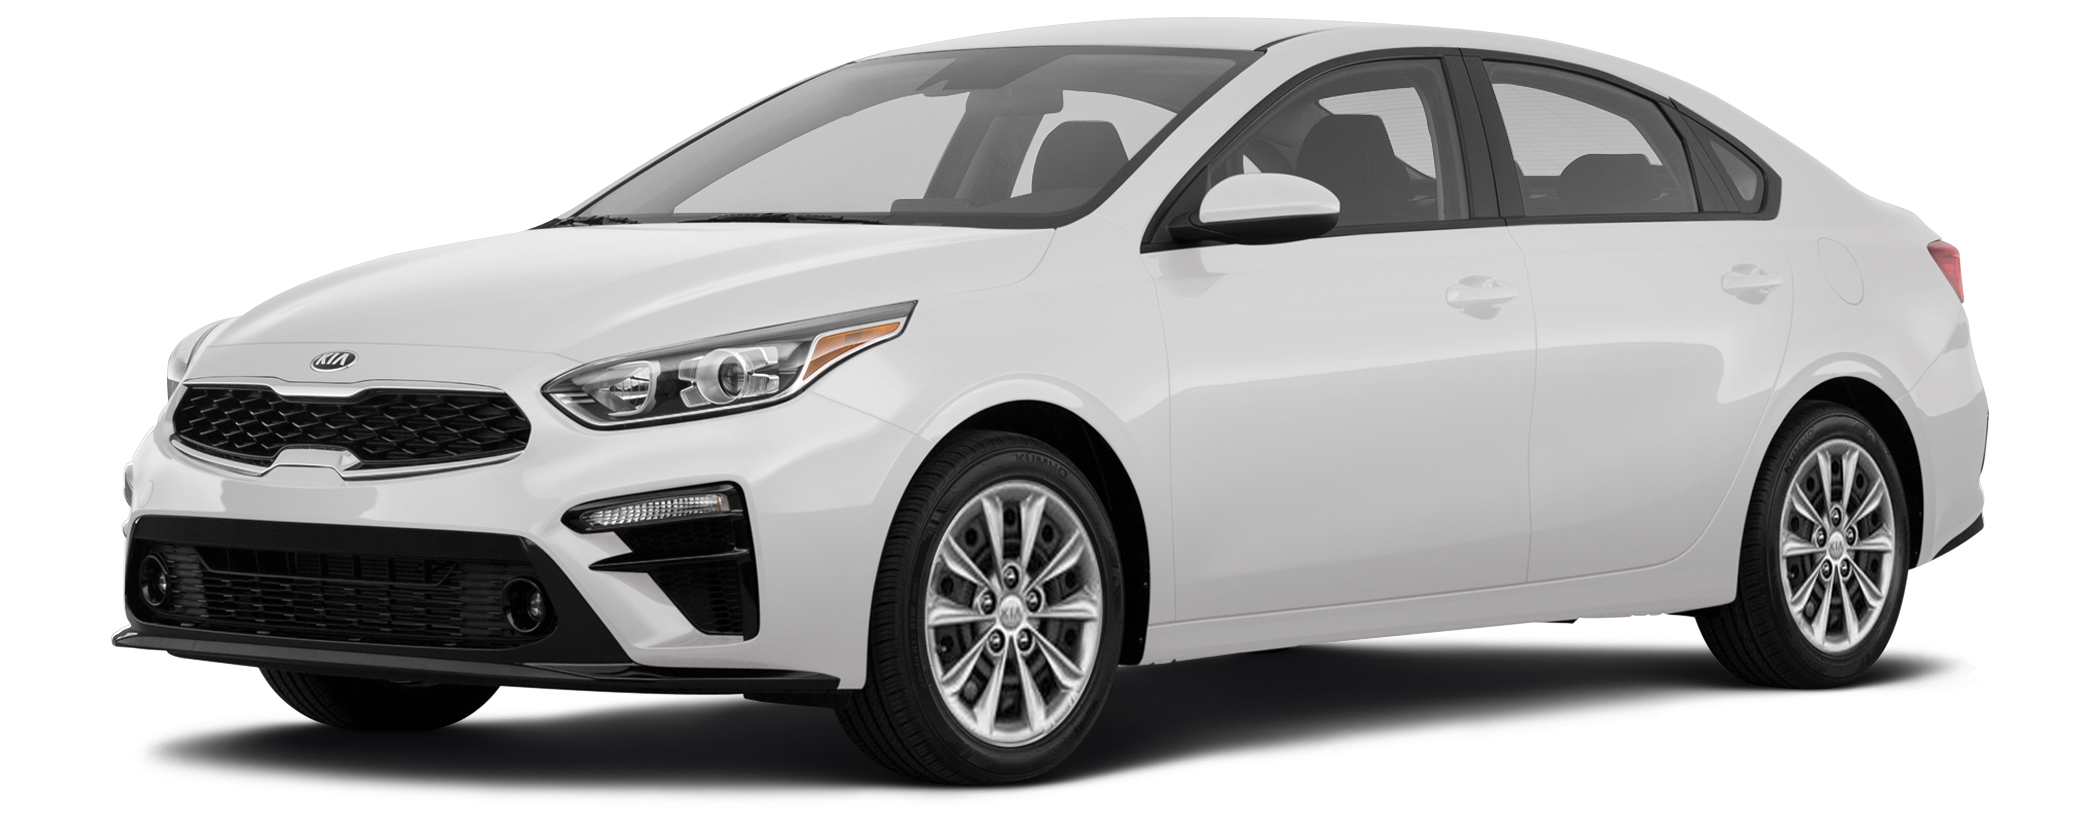 2019-kia-forte-incentives-specials-offers-in-schaumburg-il